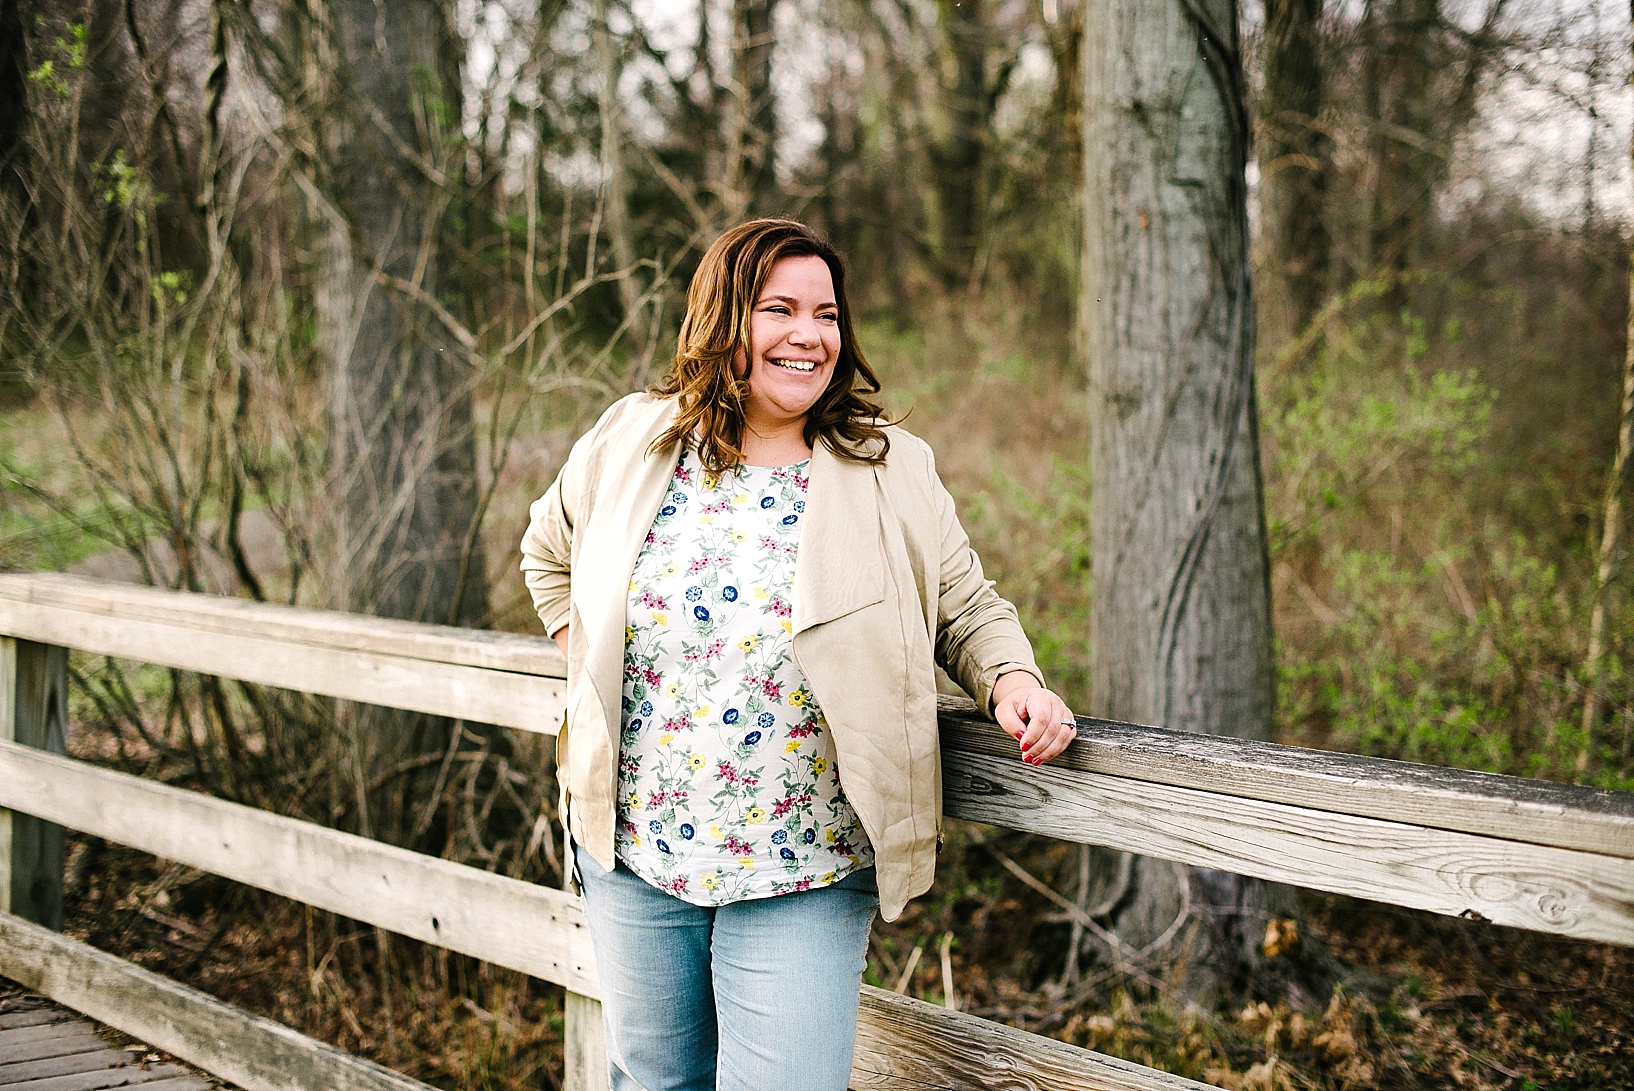 woman wearing floral print shirt, blazer, and jeans standing on wooden bridge